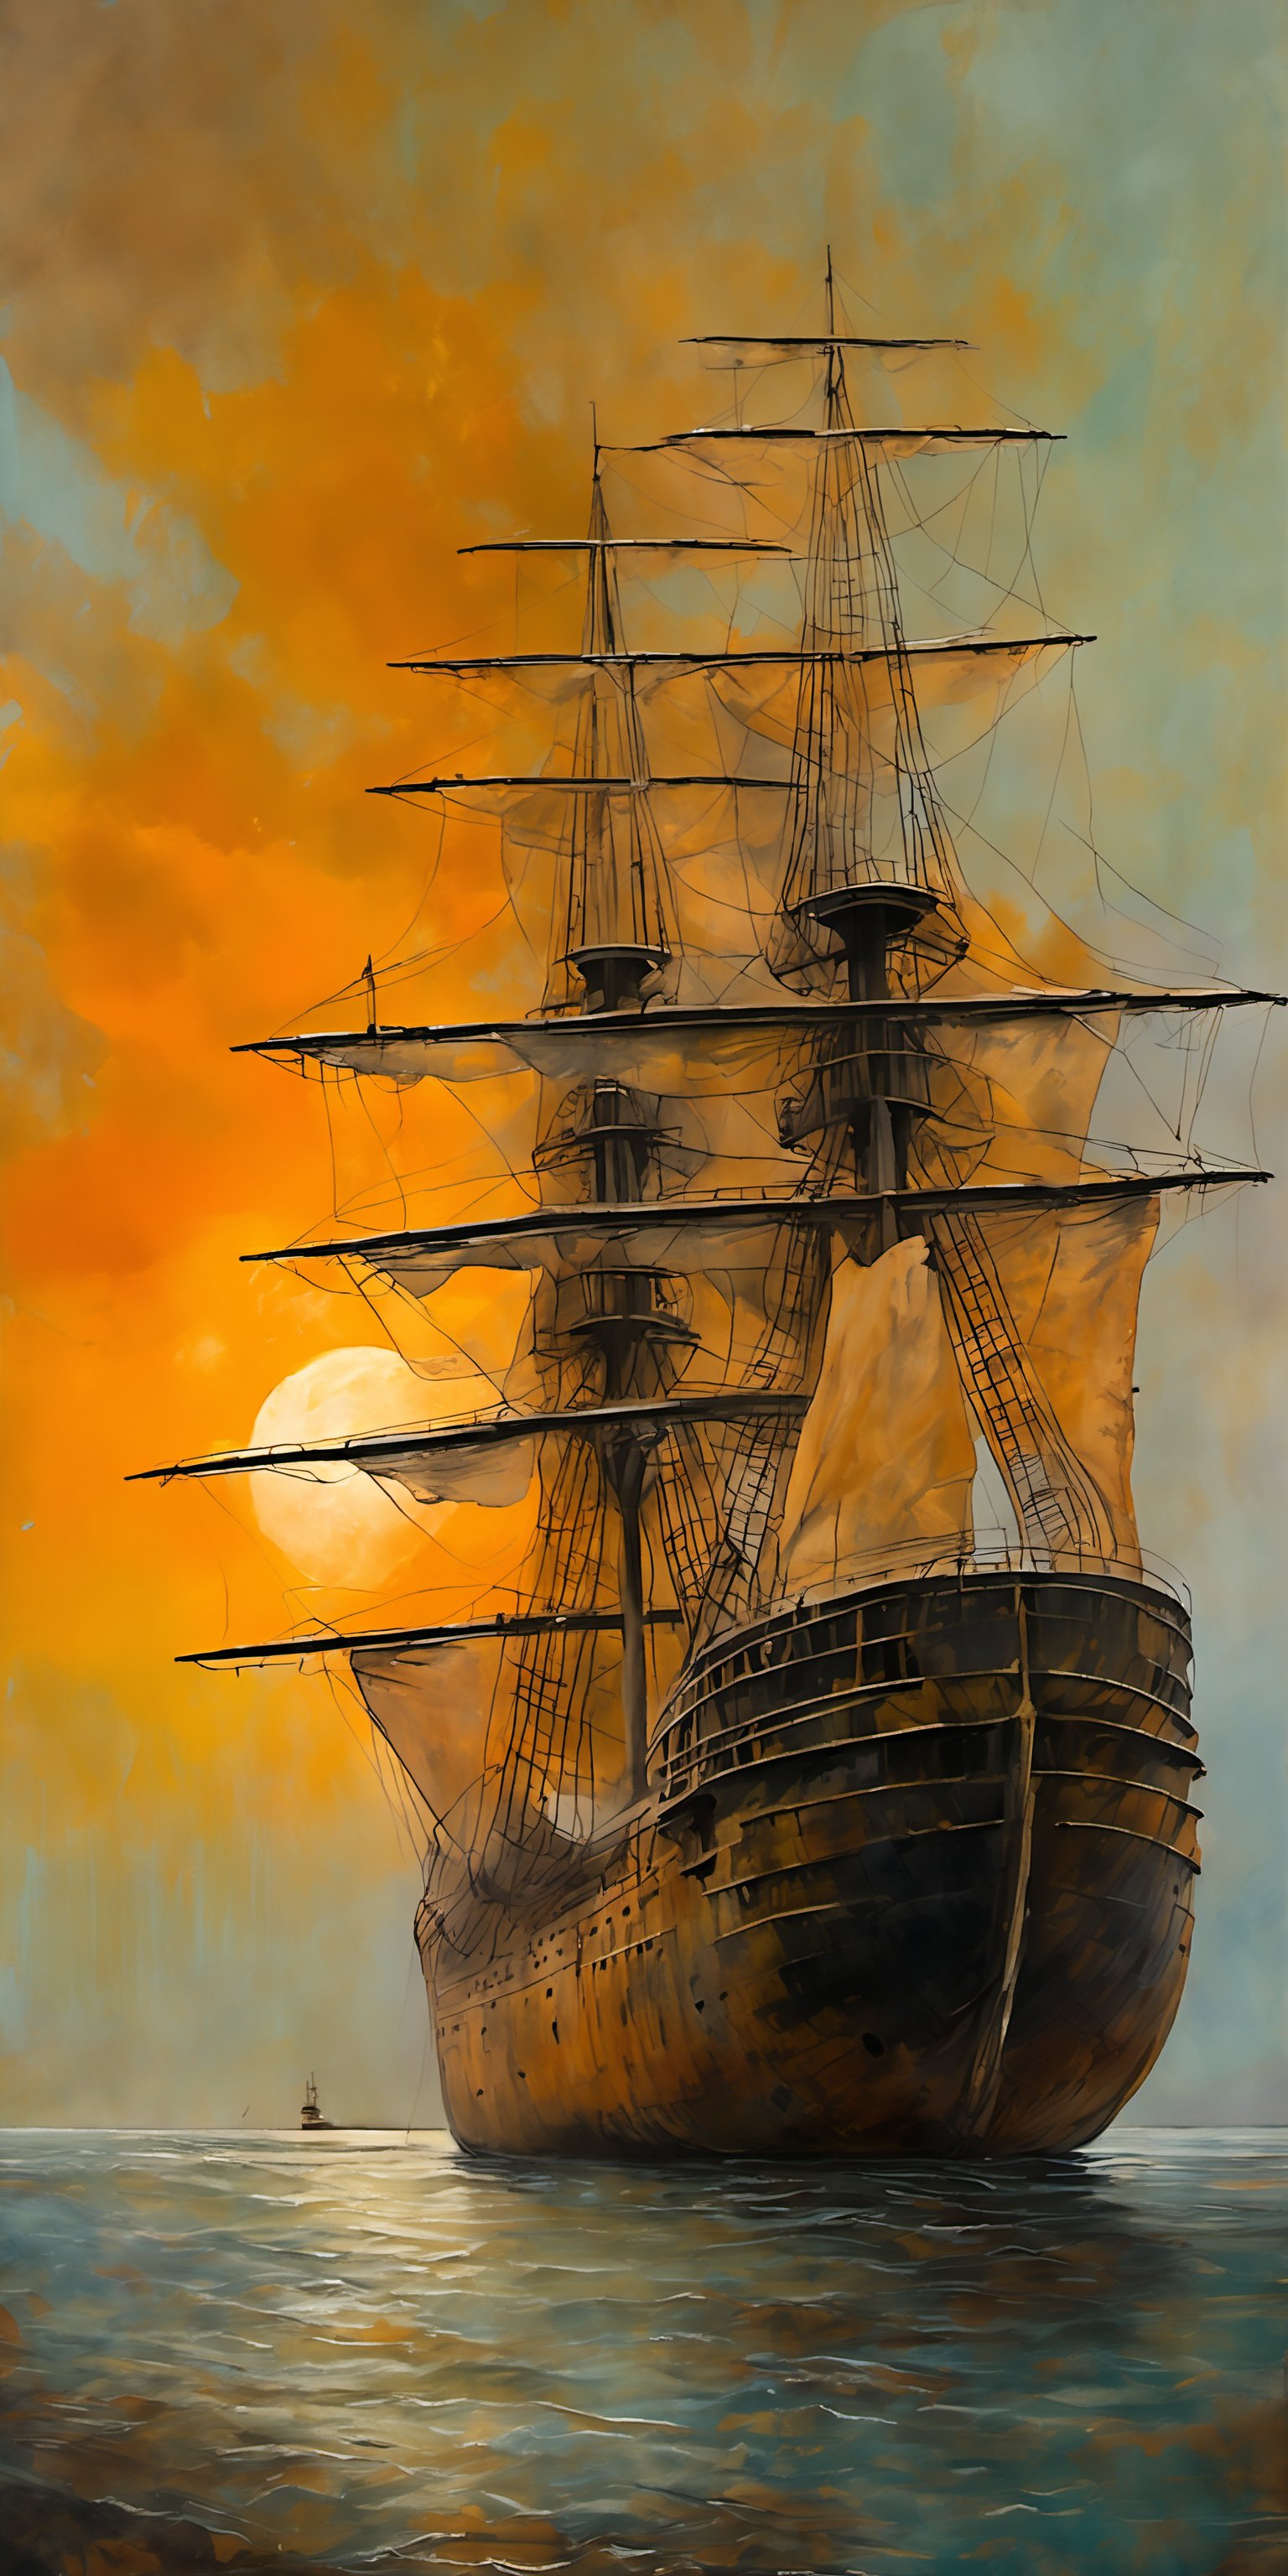 "Close-up view, hyperrealistic oil painting of the worn and aged appearance of a large, weathered English ship of the line, sailing battleship, showing signs of extensive use and time-worn features. The ship should appear short and stooped, with dirt-covered equipment and white, dirty, tattered sails that stand out. The sky should be ablaze with the soft and diffused colors of a spectacular sunset behind the ship, casting gentle shadows and creating an ethereal atmosphere. The overall effect is a blend of impressionism and abstraction, creating a rich, immersive setting that complements the hyperrealistic, sharp focus on the worn and aged appearance of the large, weathered ship in the foreground. In contrast, the background should transition into an abstract, painterly environment with bold and textured brushstrokes adding depth and movement. The overall effect should capture the immense scale and rugged beauty of the scene, with dramatic lighting emphasizing the textures and features of the ship. The atmosphere should be hazy and diffuse, contributing to an ethereal and somewhat dystopian feel. Indistinct forms and shapes in the background should suggest a spectacular sunset in the mountains, rendered in a loose, impressionistic style to emphasize mood and atmosphere over detailed realism. Use a muted color palette with cooler tones such as grays, blues, and greens to create depth and atmosphere. Use muted shades of earthy tones to depict worn, weathered and aged appearances. Use muted accents like rusty orange-yellows and rusty teals to highlight tiny areas and add visual interest. Use this blend of subdued and bold colors to emphasize the gritty nature of the scene."